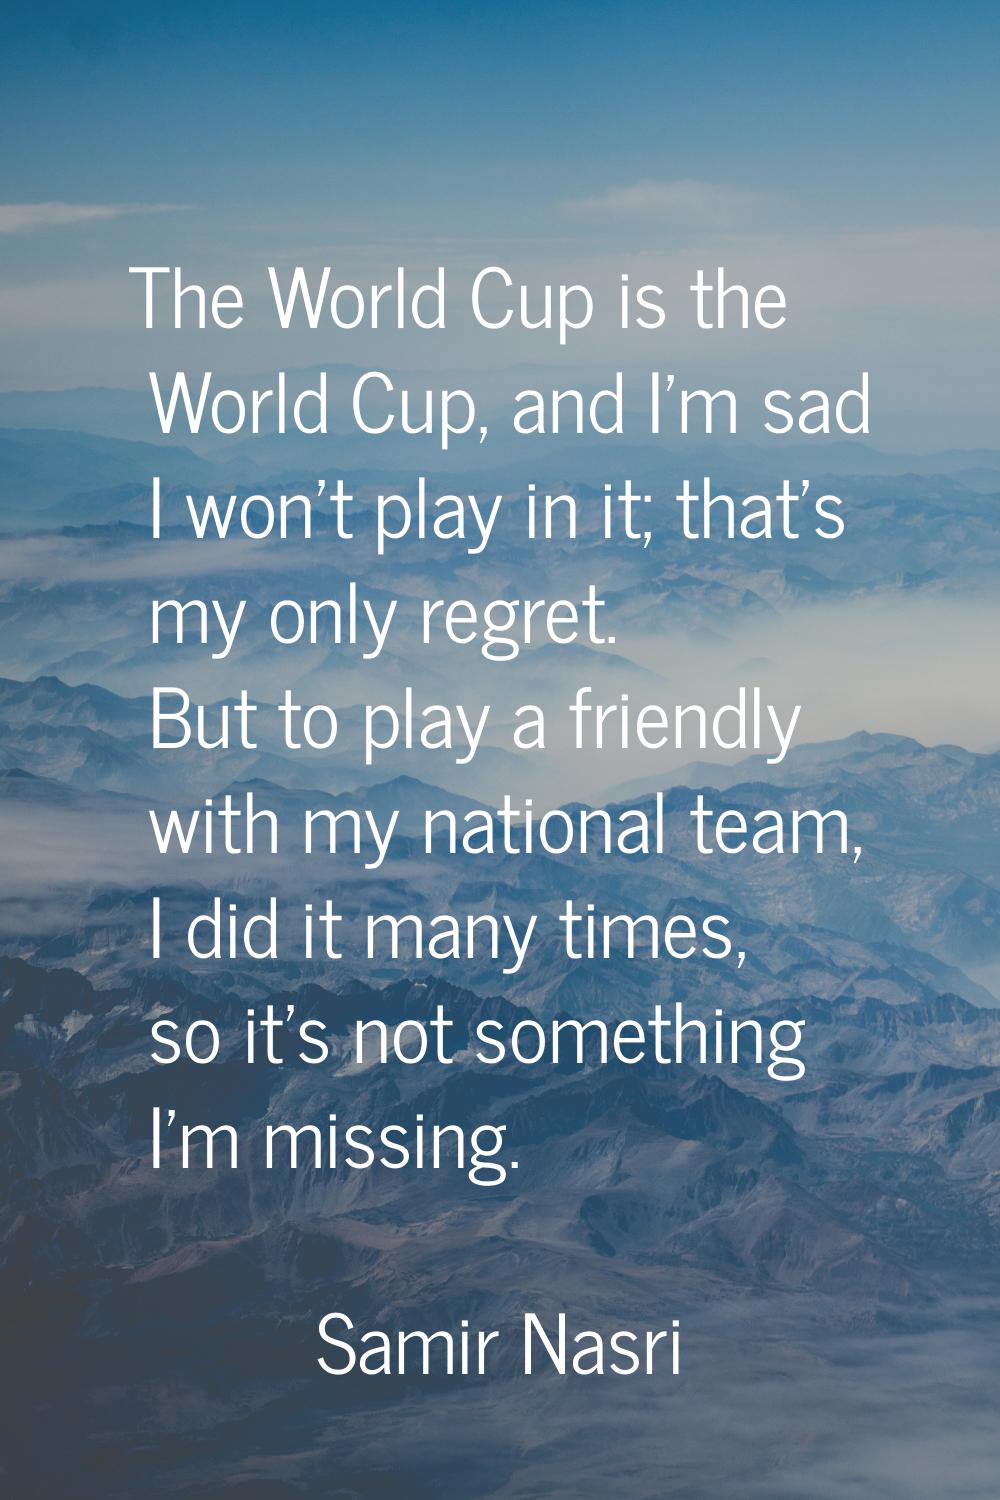 The World Cup is the World Cup, and I'm sad I won't play in it; that's my only regret. But to play 